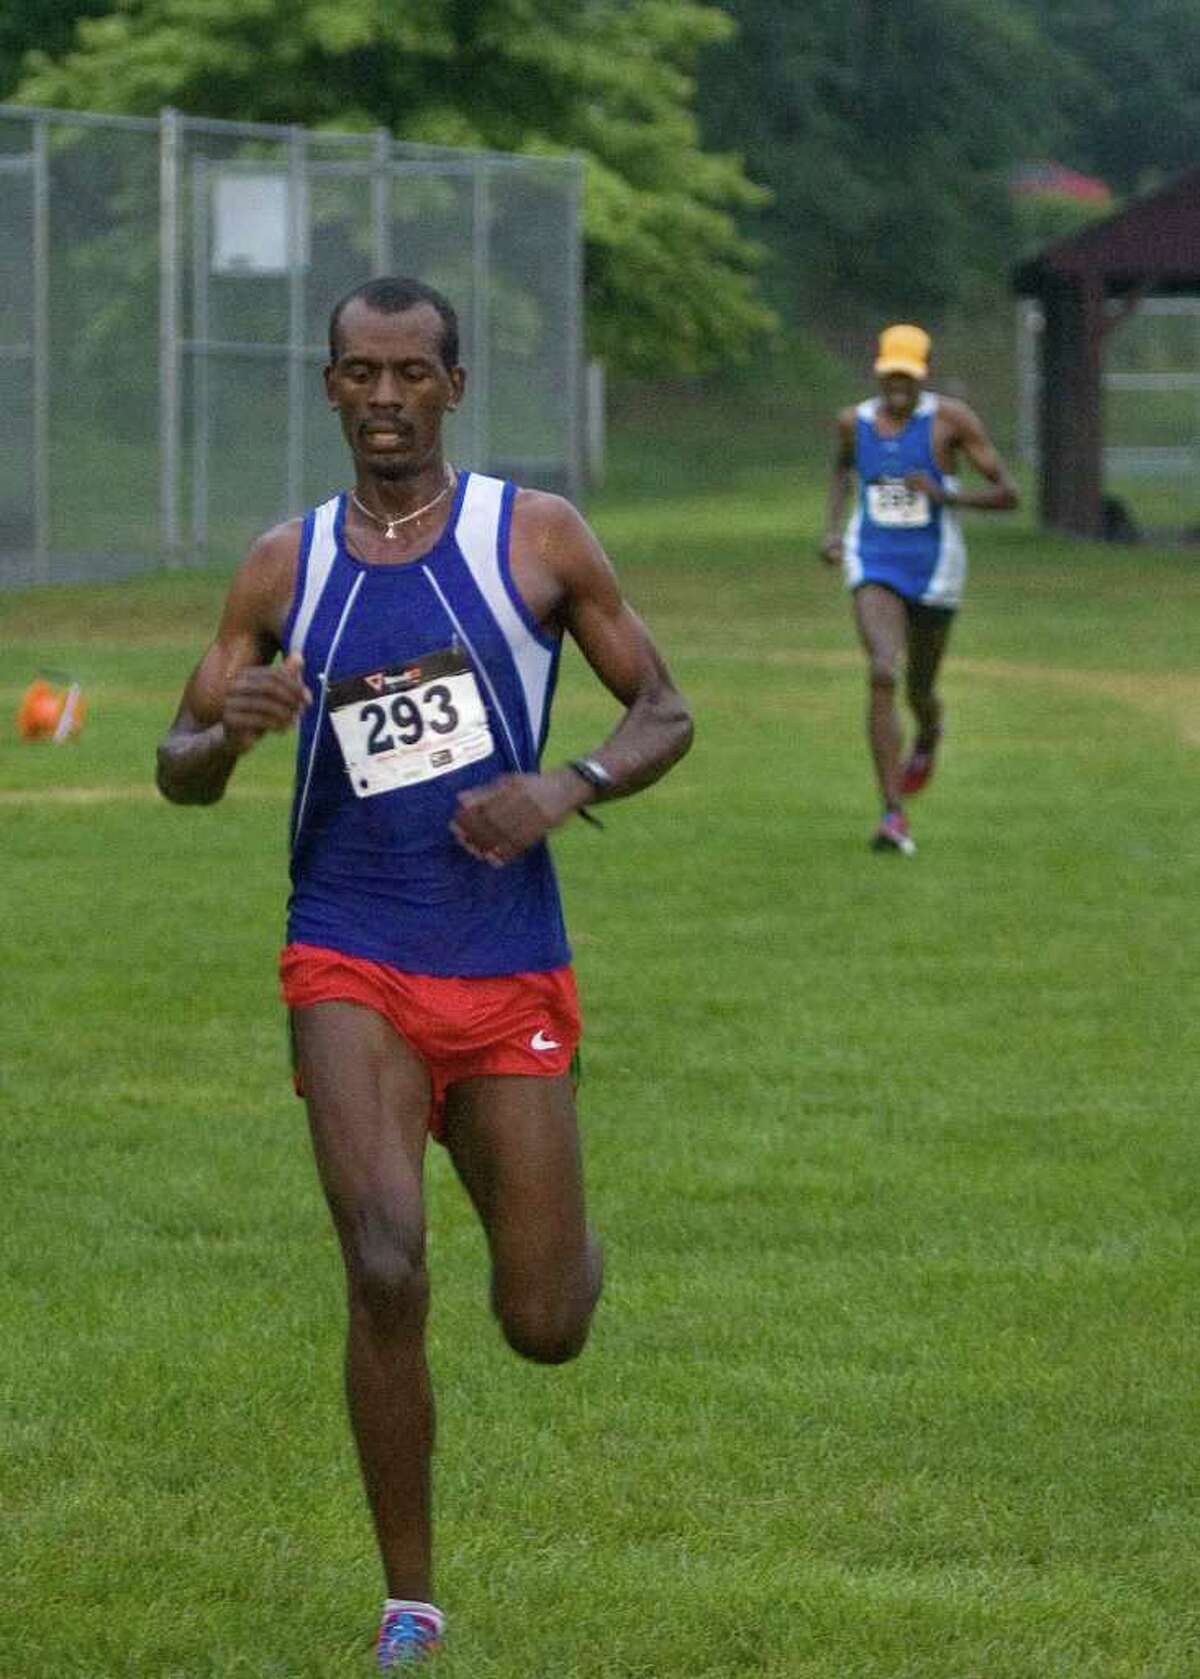 Kumsa Megersa, left, crosses the finish line in first place as fellow Bronx, NY, resident Abiyot Endale finishes in second place during the New Milford Moonlight Run 5K road race on Friday, July 8, 2011. Both men are originally from Ethiopia.